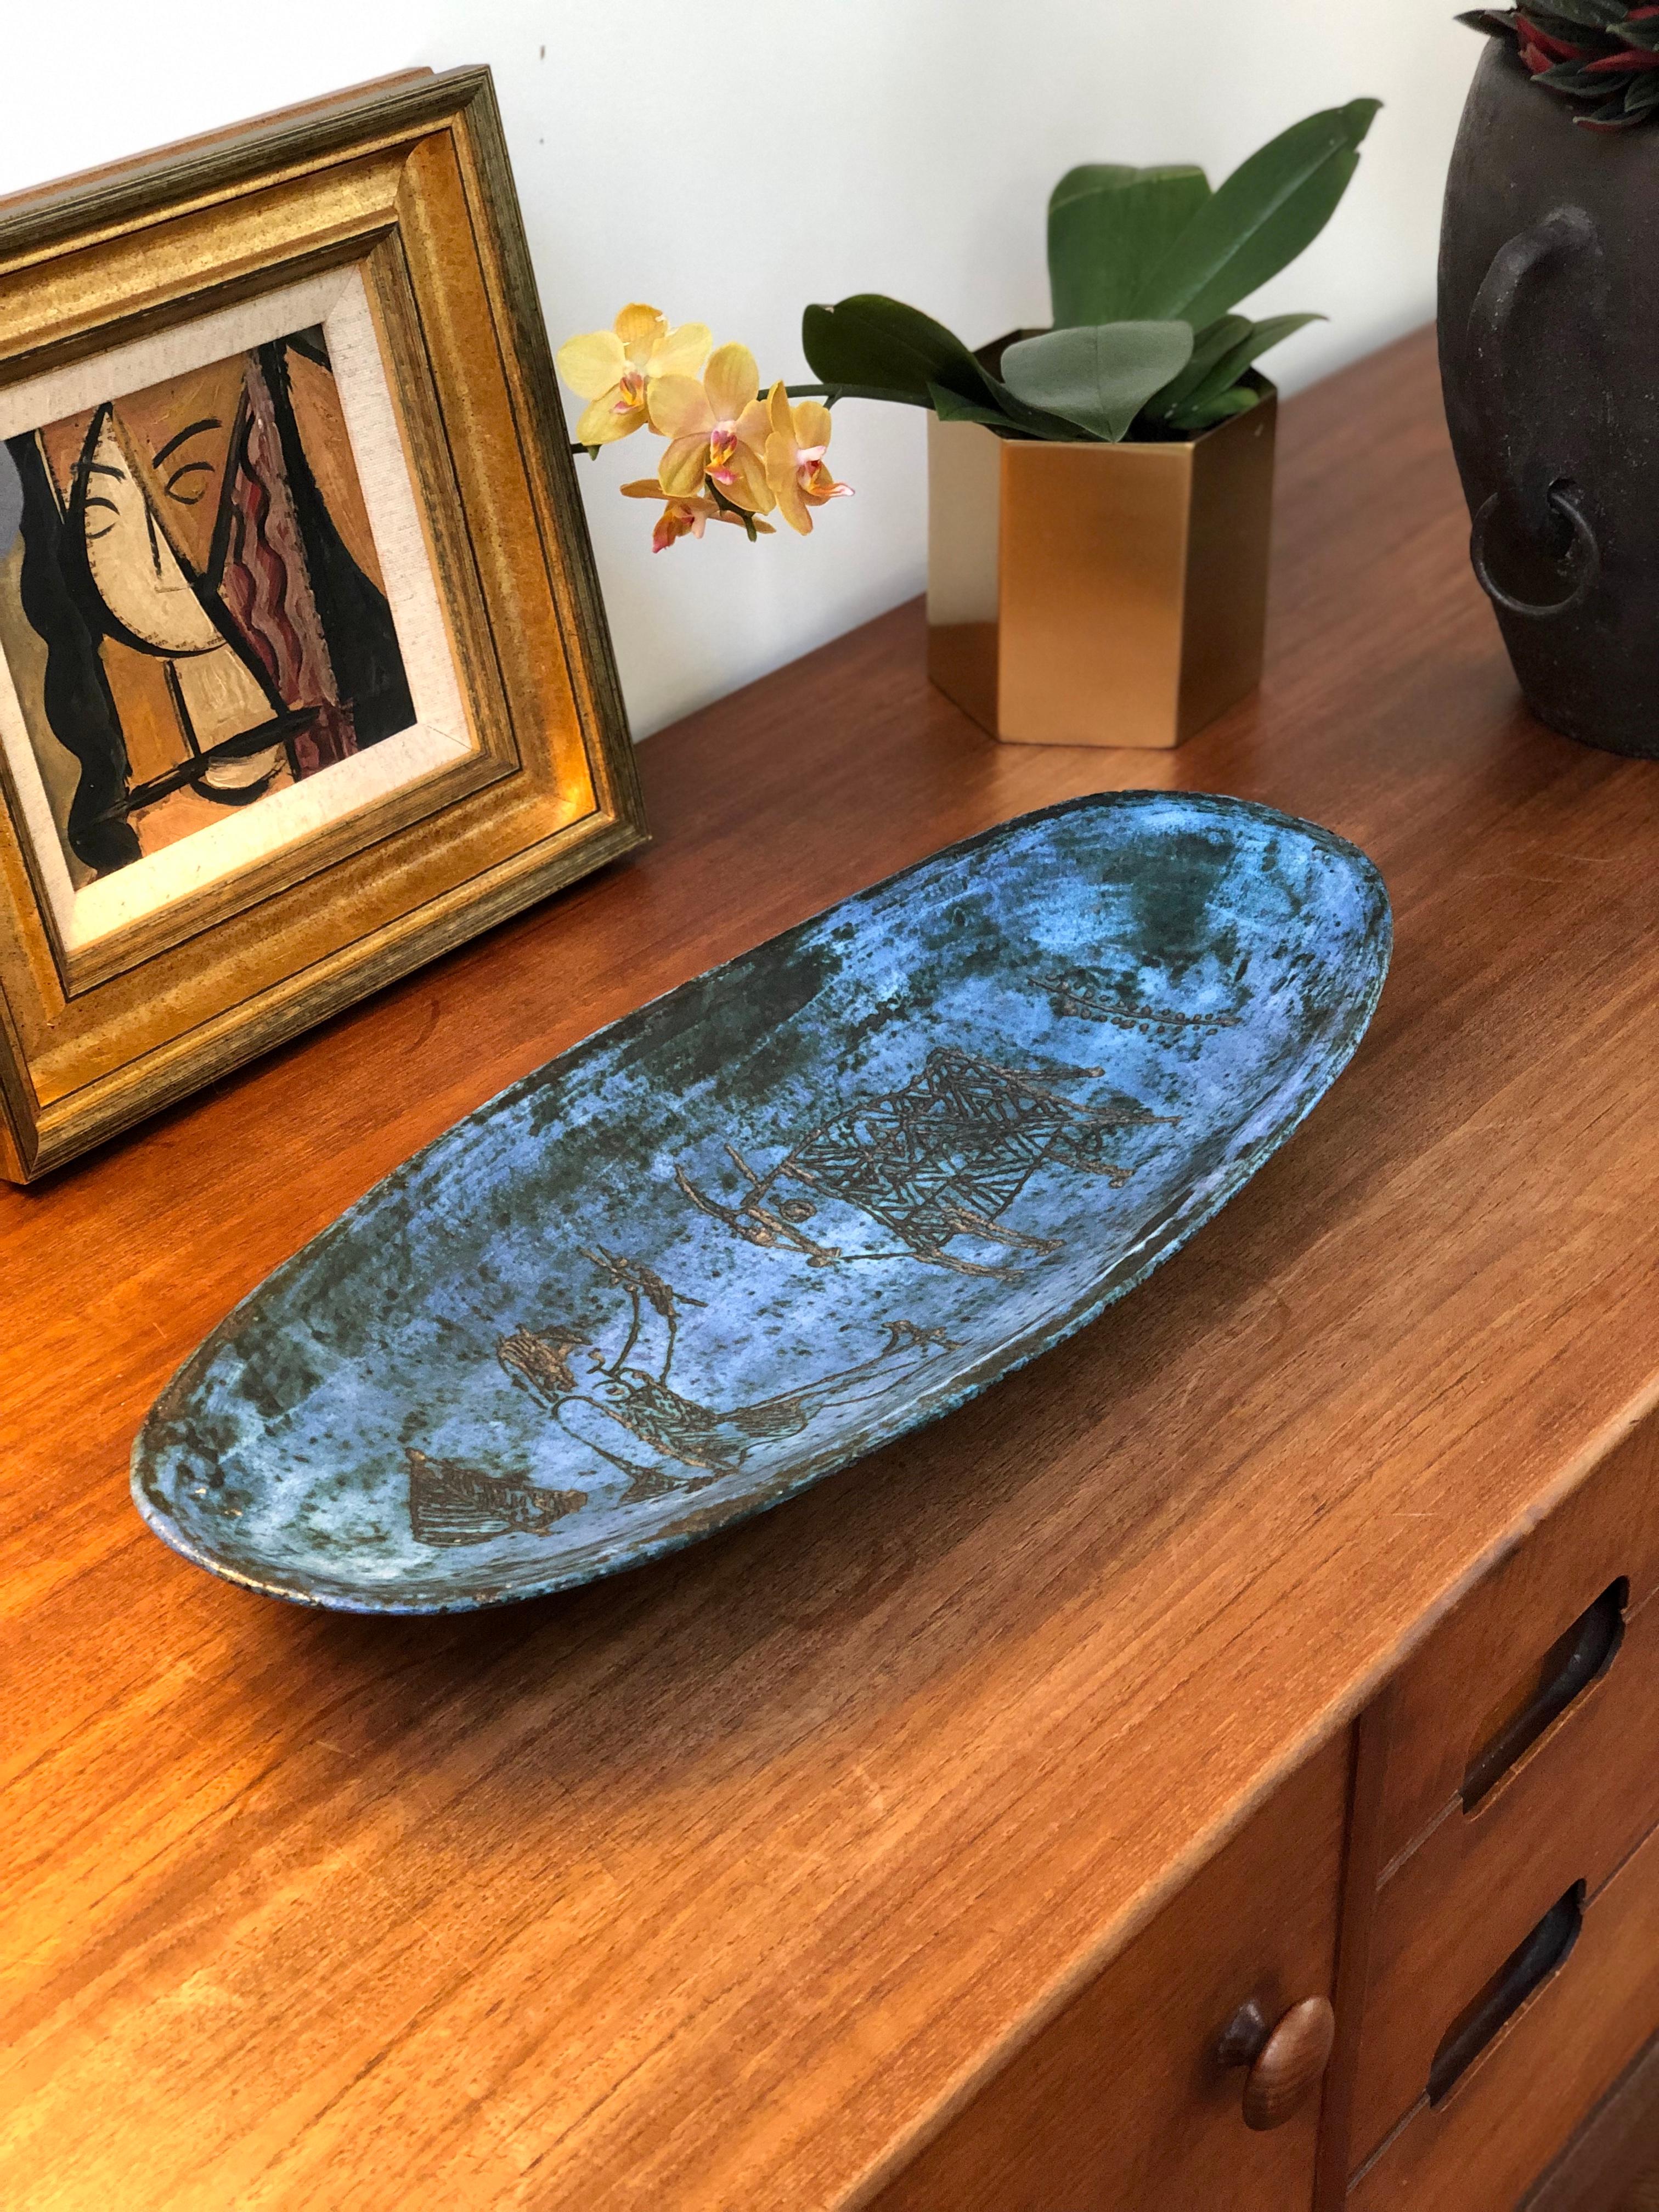 This wonderfully elegant ceramic tray (circa 1950s) has Blin's trademark cloudy blue glaze featuring primeval images of a tree, a seated woman with outstretched arm, a bull and a plant etched in the center of the piece but seemingly from an